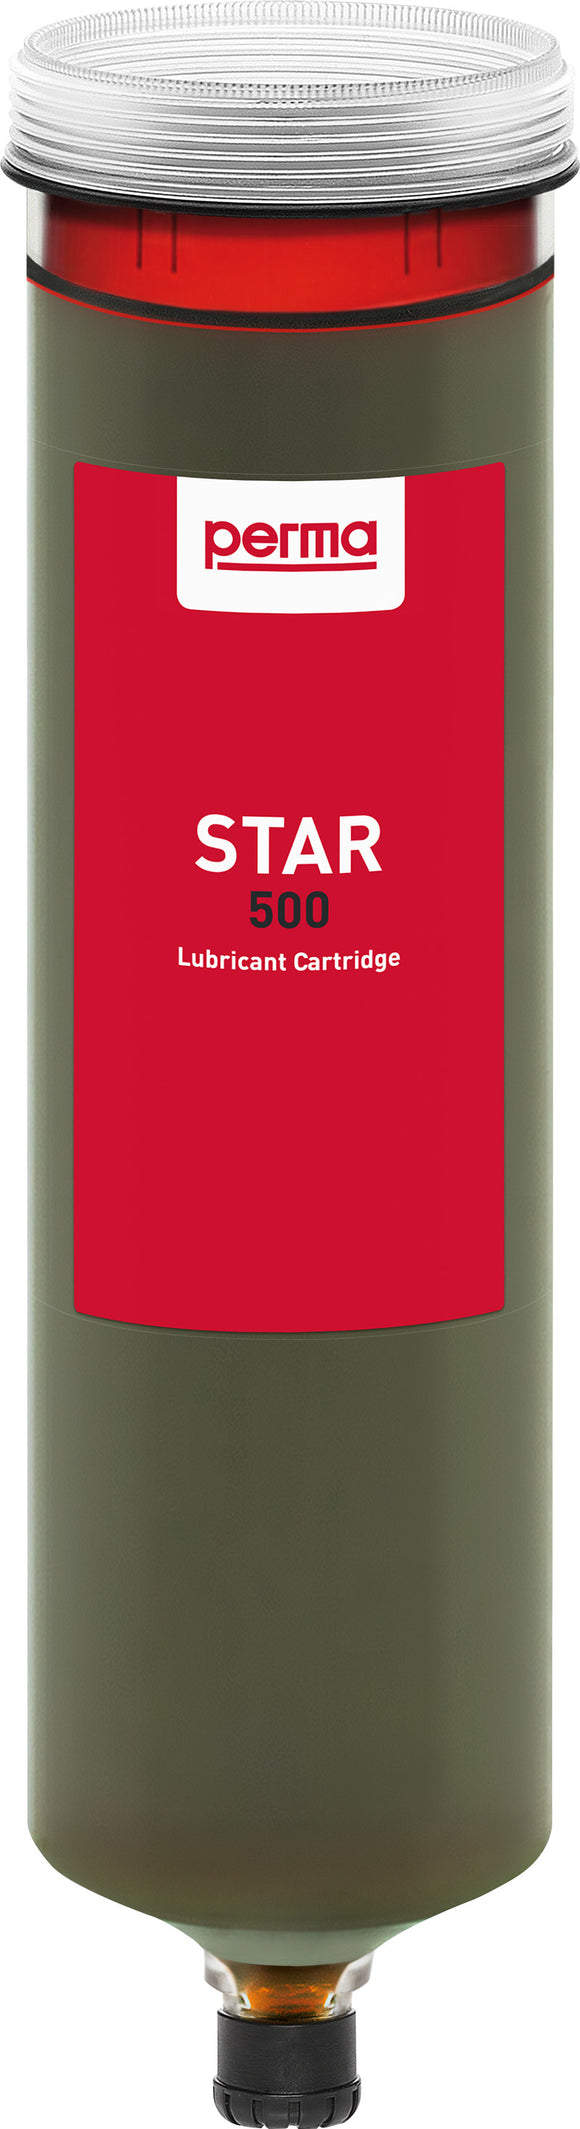 Perma Star LC 500 with Perma High speed Grease SF08